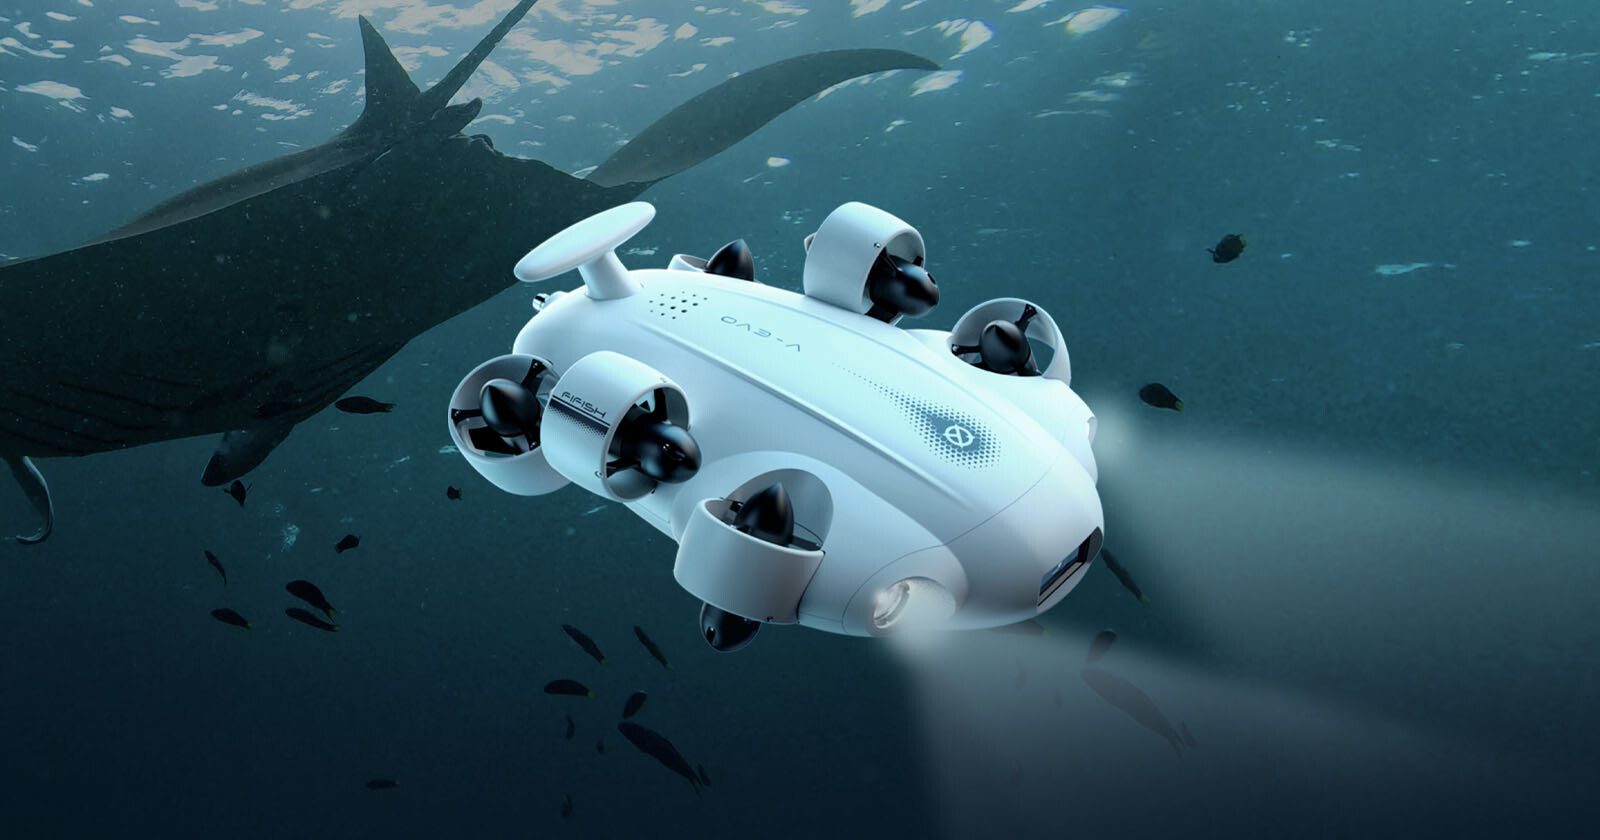 The Fifish V-Evo is the First All-in-One Underwater Drone to Shoot 4K 60FPS